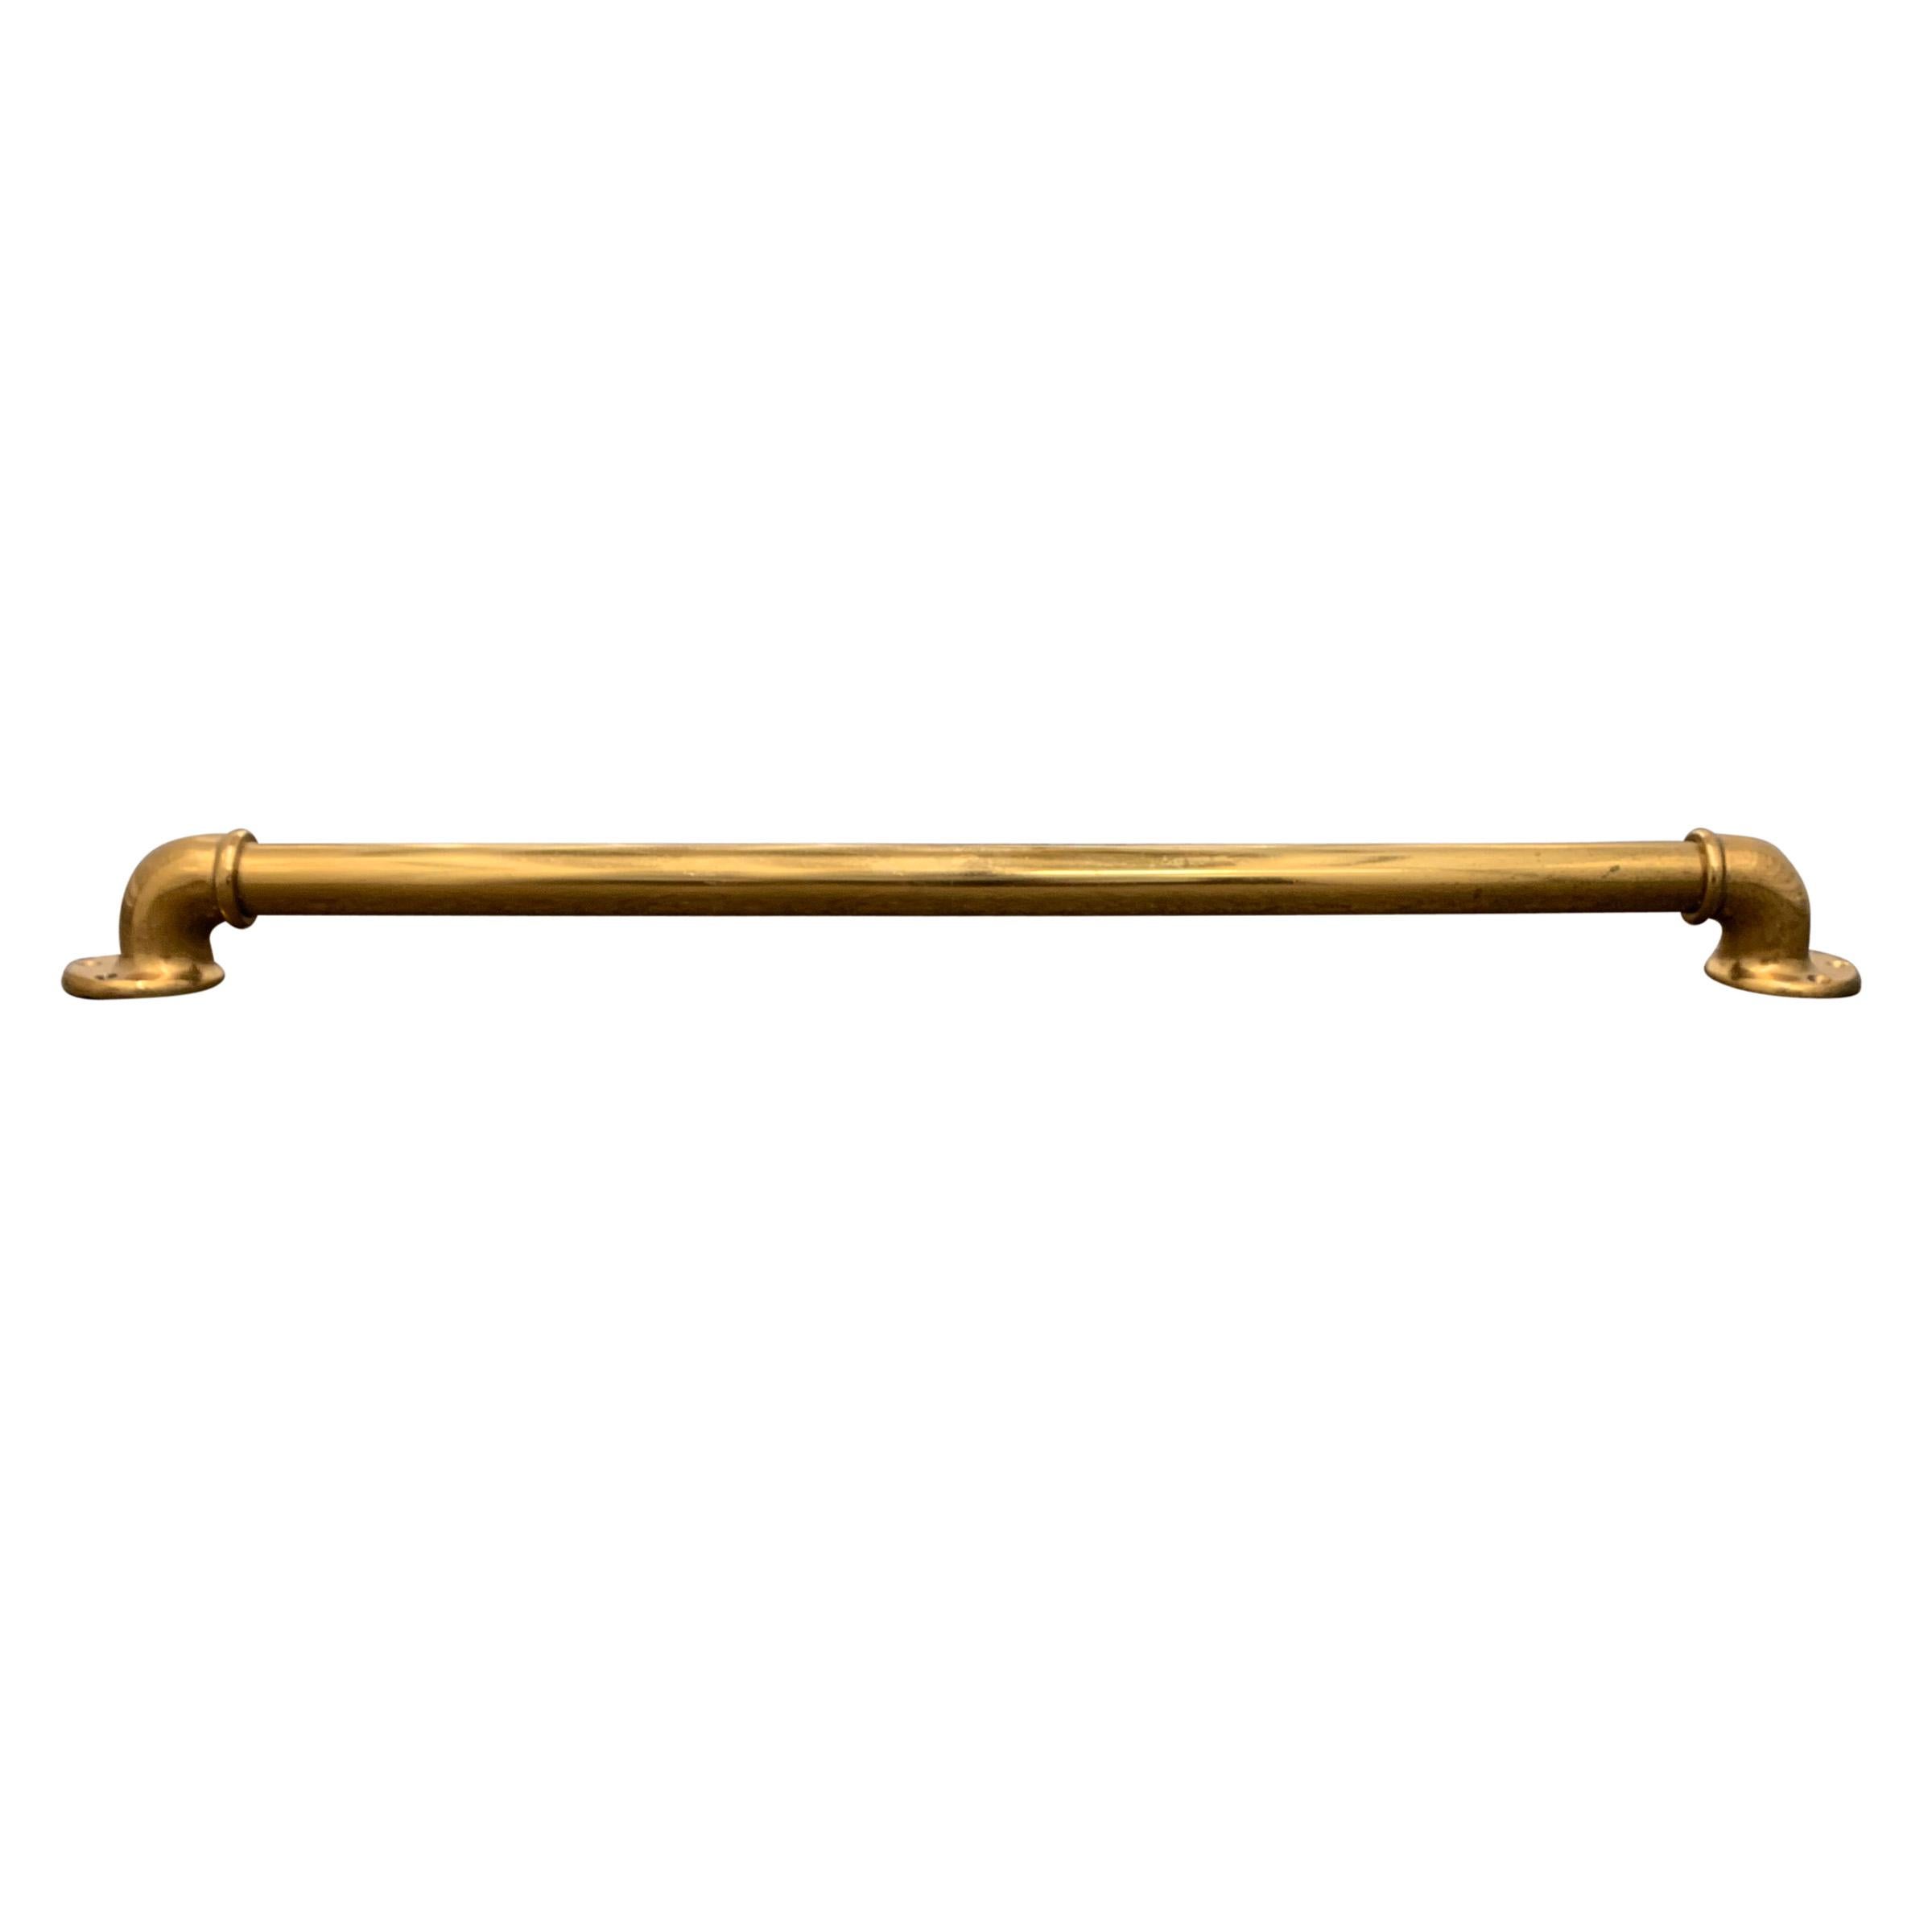 A pair of early 20th century American polished brass handles or towel bars with cast ends. Two different lengths.

Measures: One: 24 in. W x 2 in. D x 2 in. H
Two: 25 in. W x 2 in. D x 2 in. H.